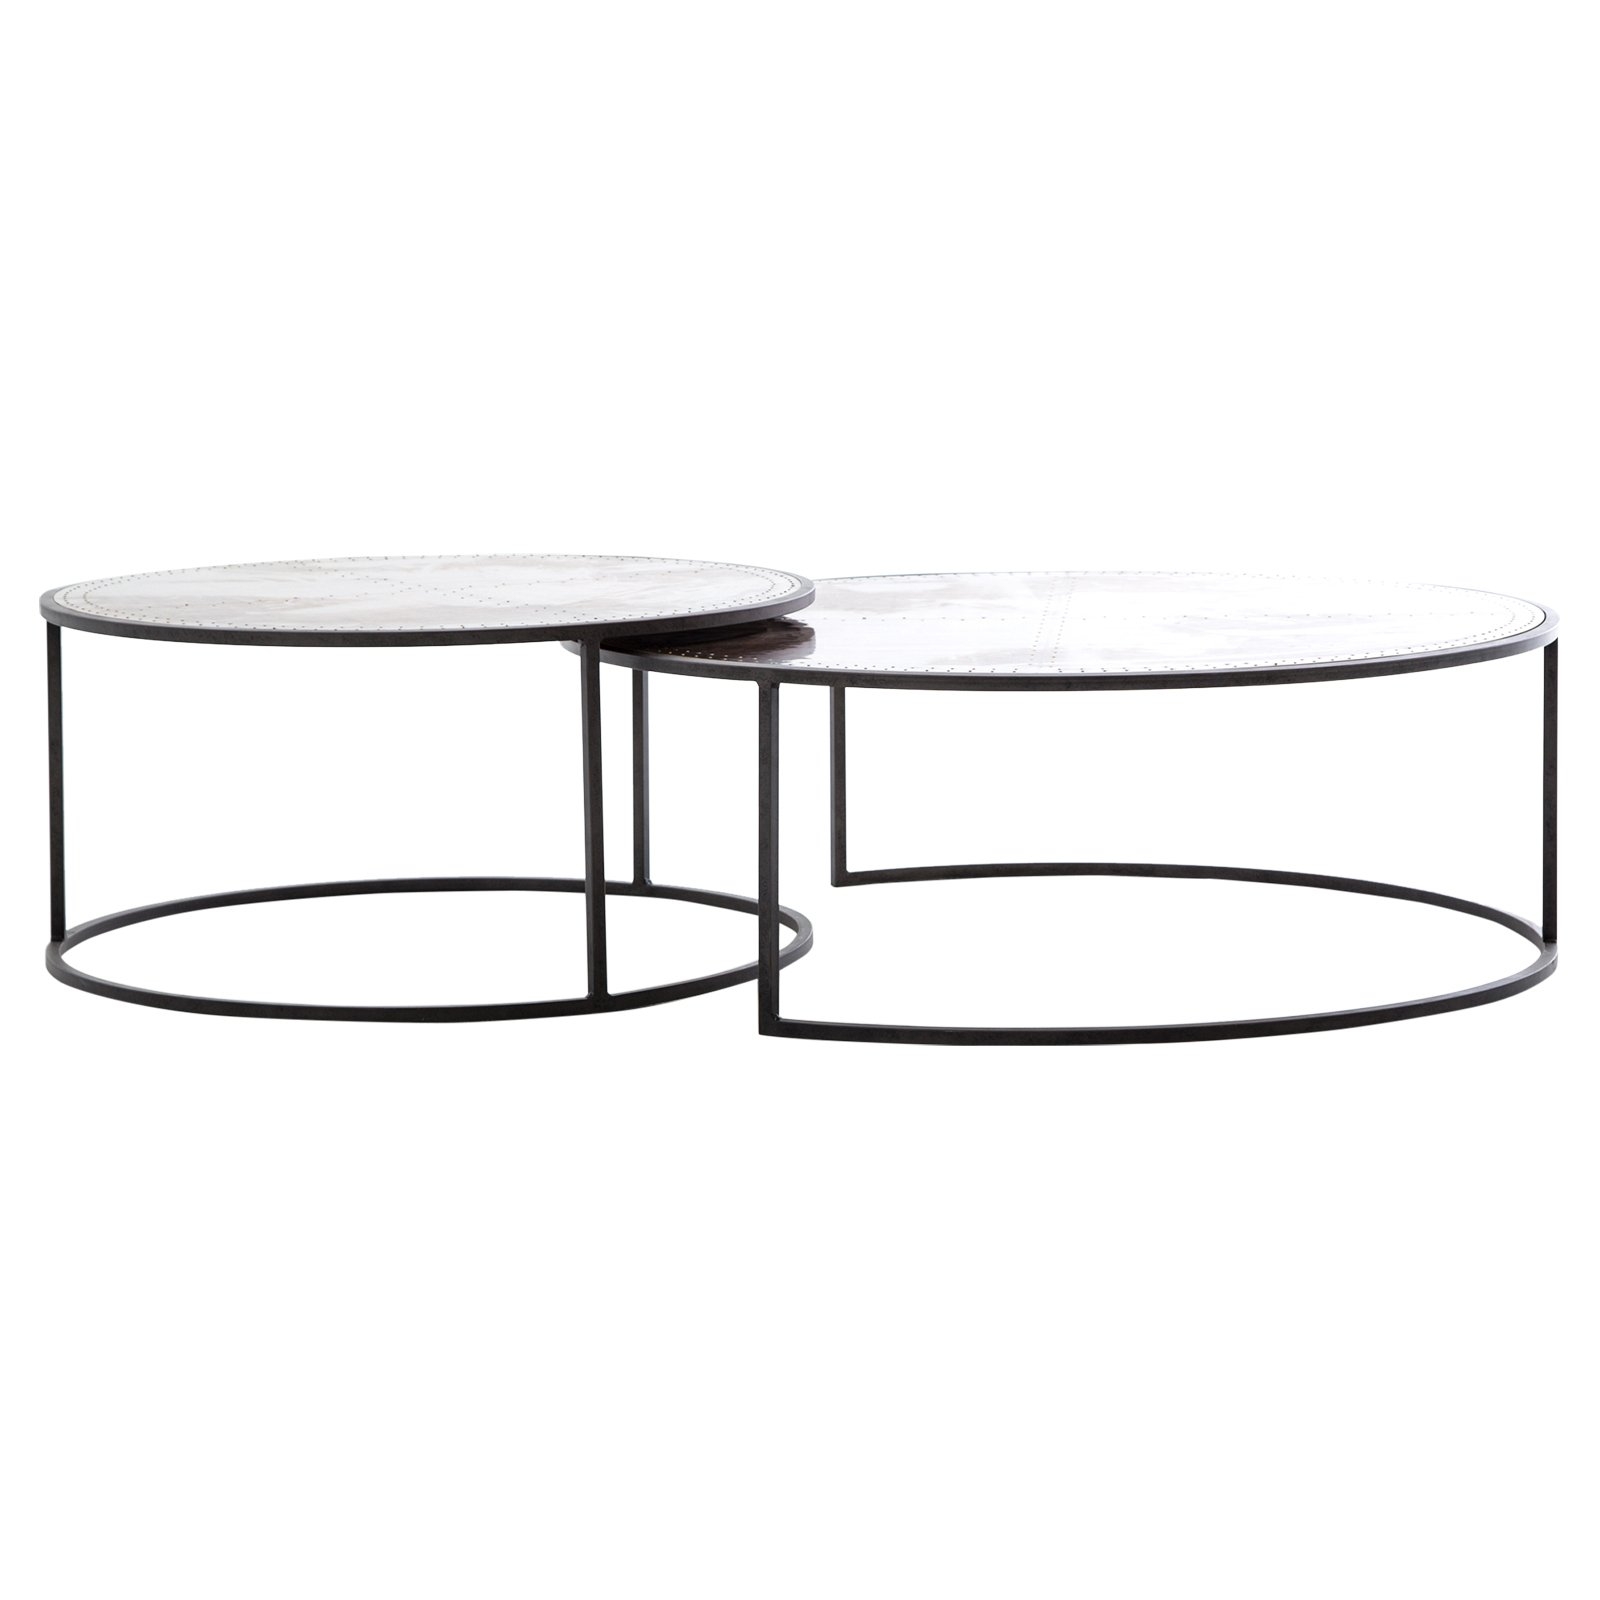 Ariel Industrial Loft Copper Studded Nesting Coffee Table - Pair - Image 0